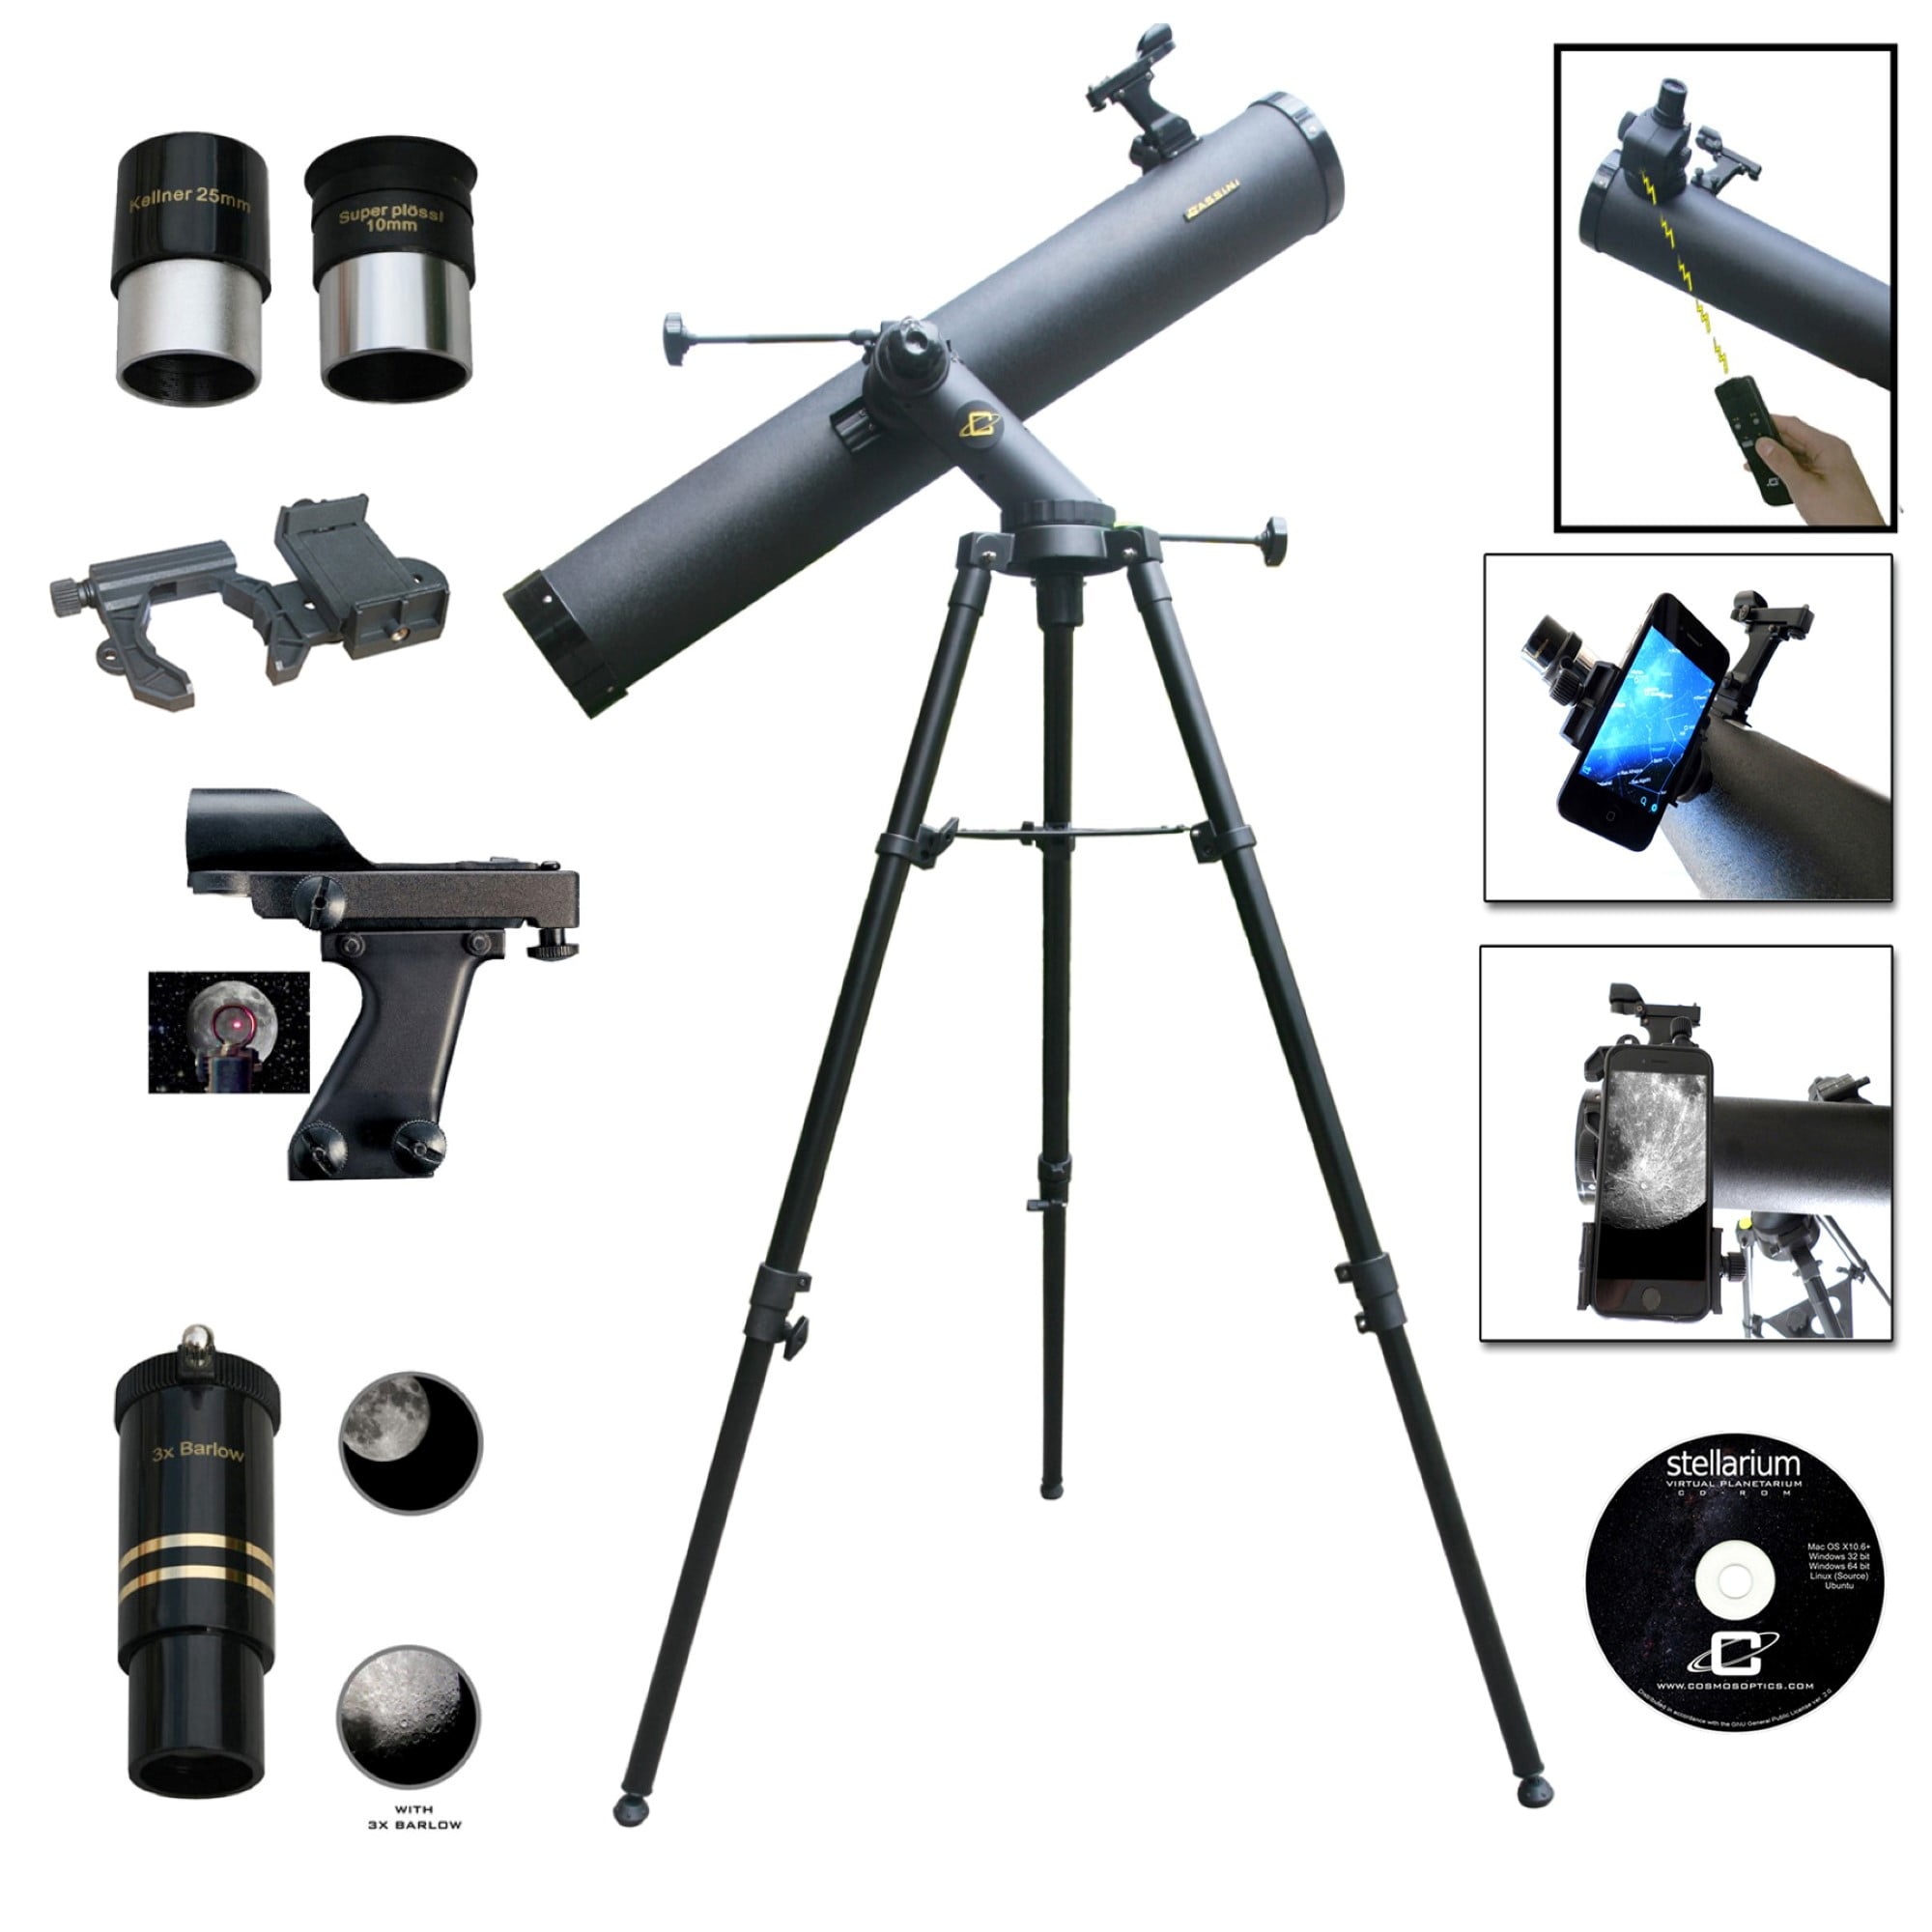 Cassini 1100mm X 102mm Astronomical Tracker Mount Telescope Kit with Color Filter Wheel 